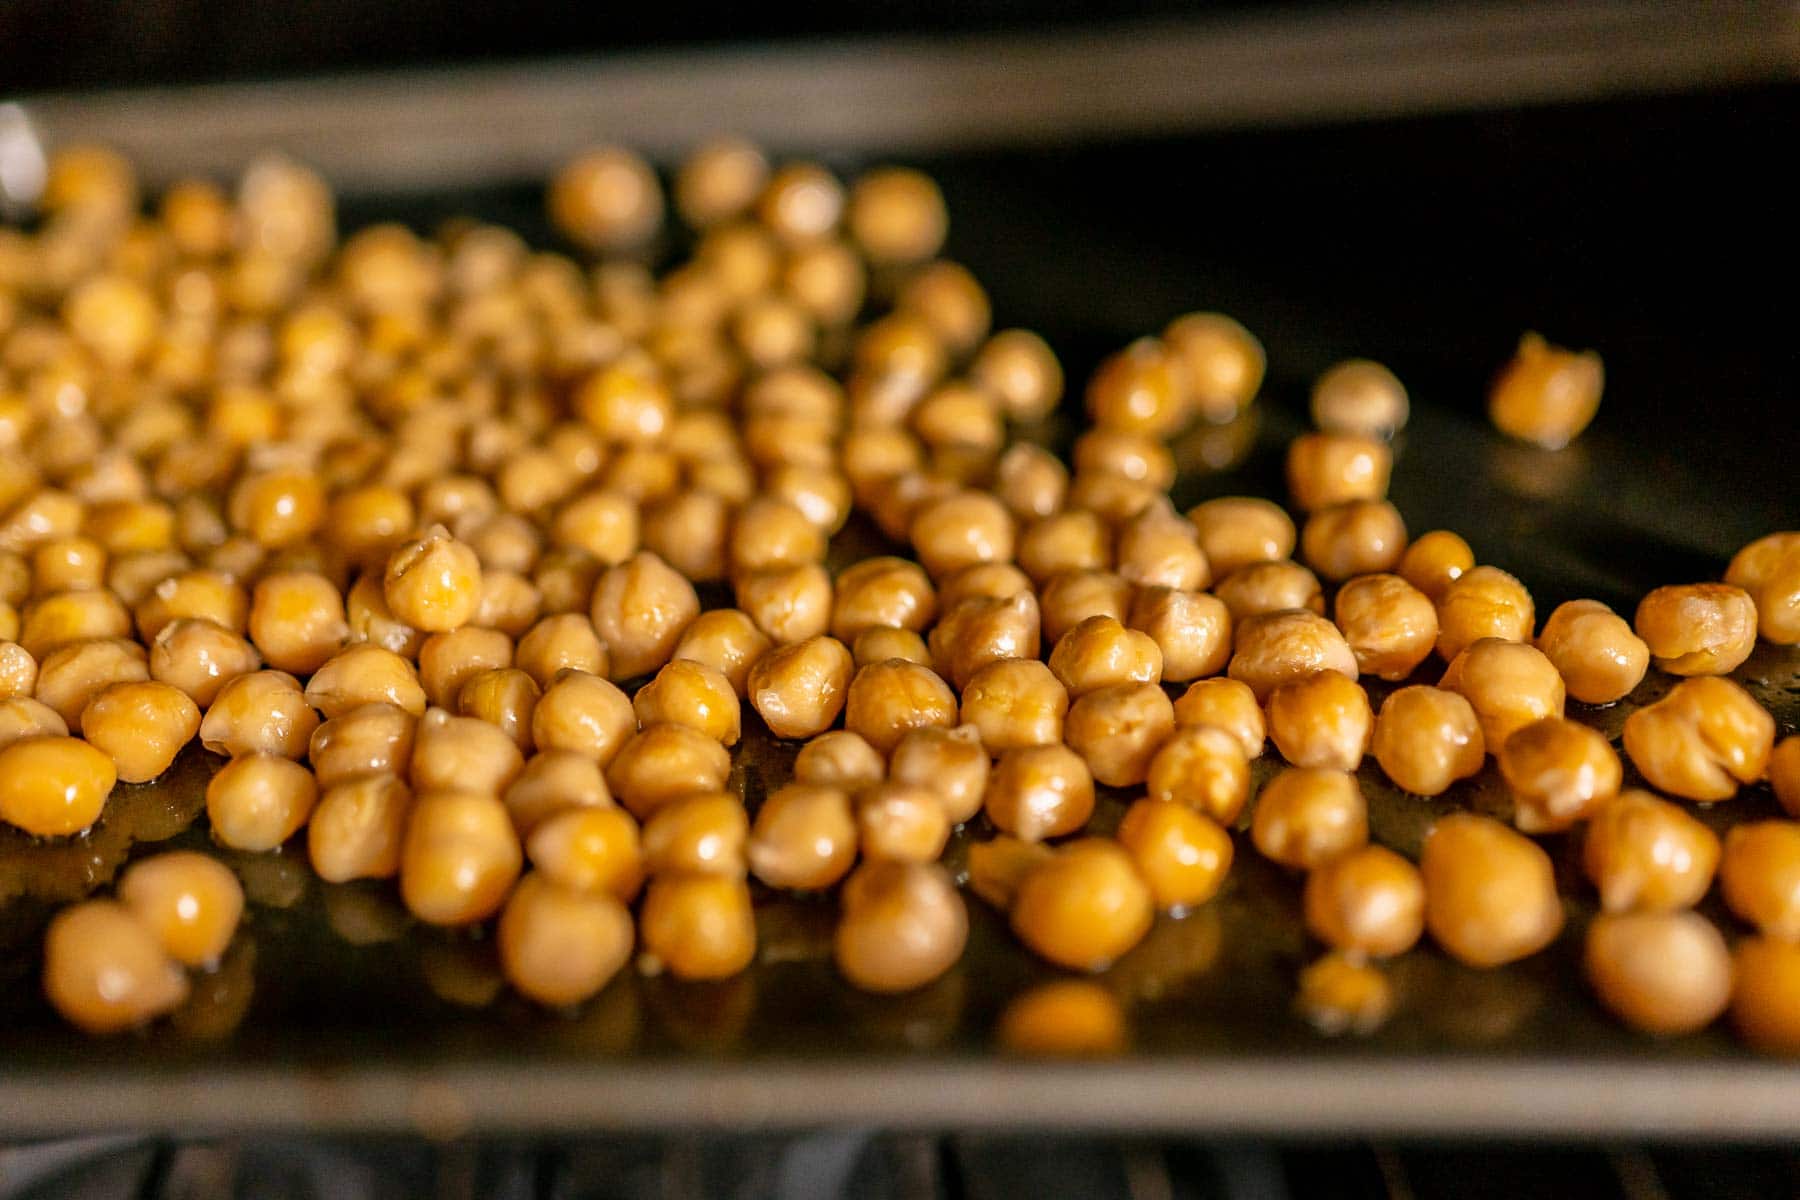 A baking sheet filled with chickpeas on the top rack of the oven.